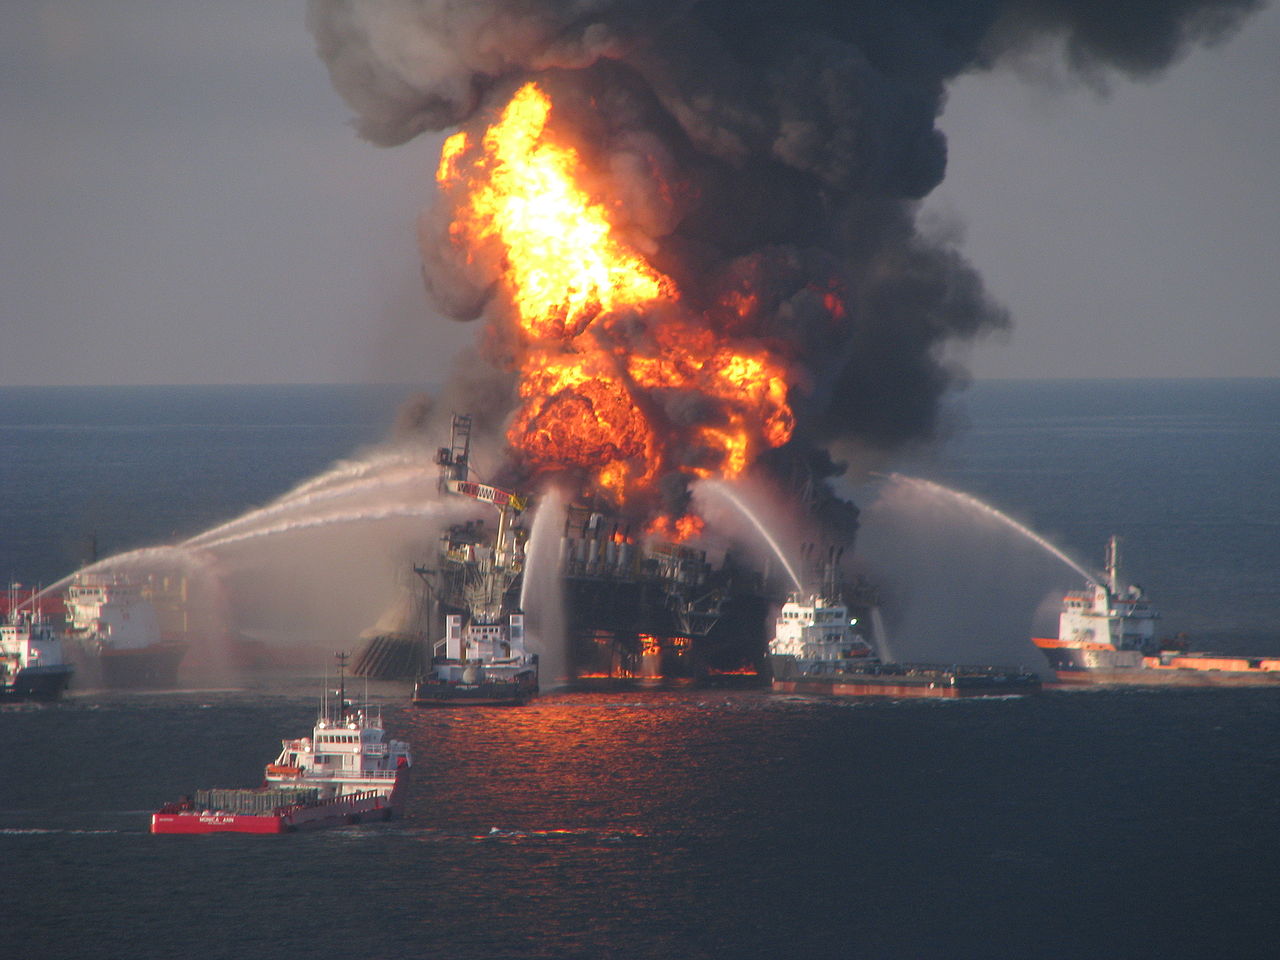 Deepwater_Horizon_offshore_drilling_unit_on_fire_Credit_US_Coast_Guards_Creative_Commons